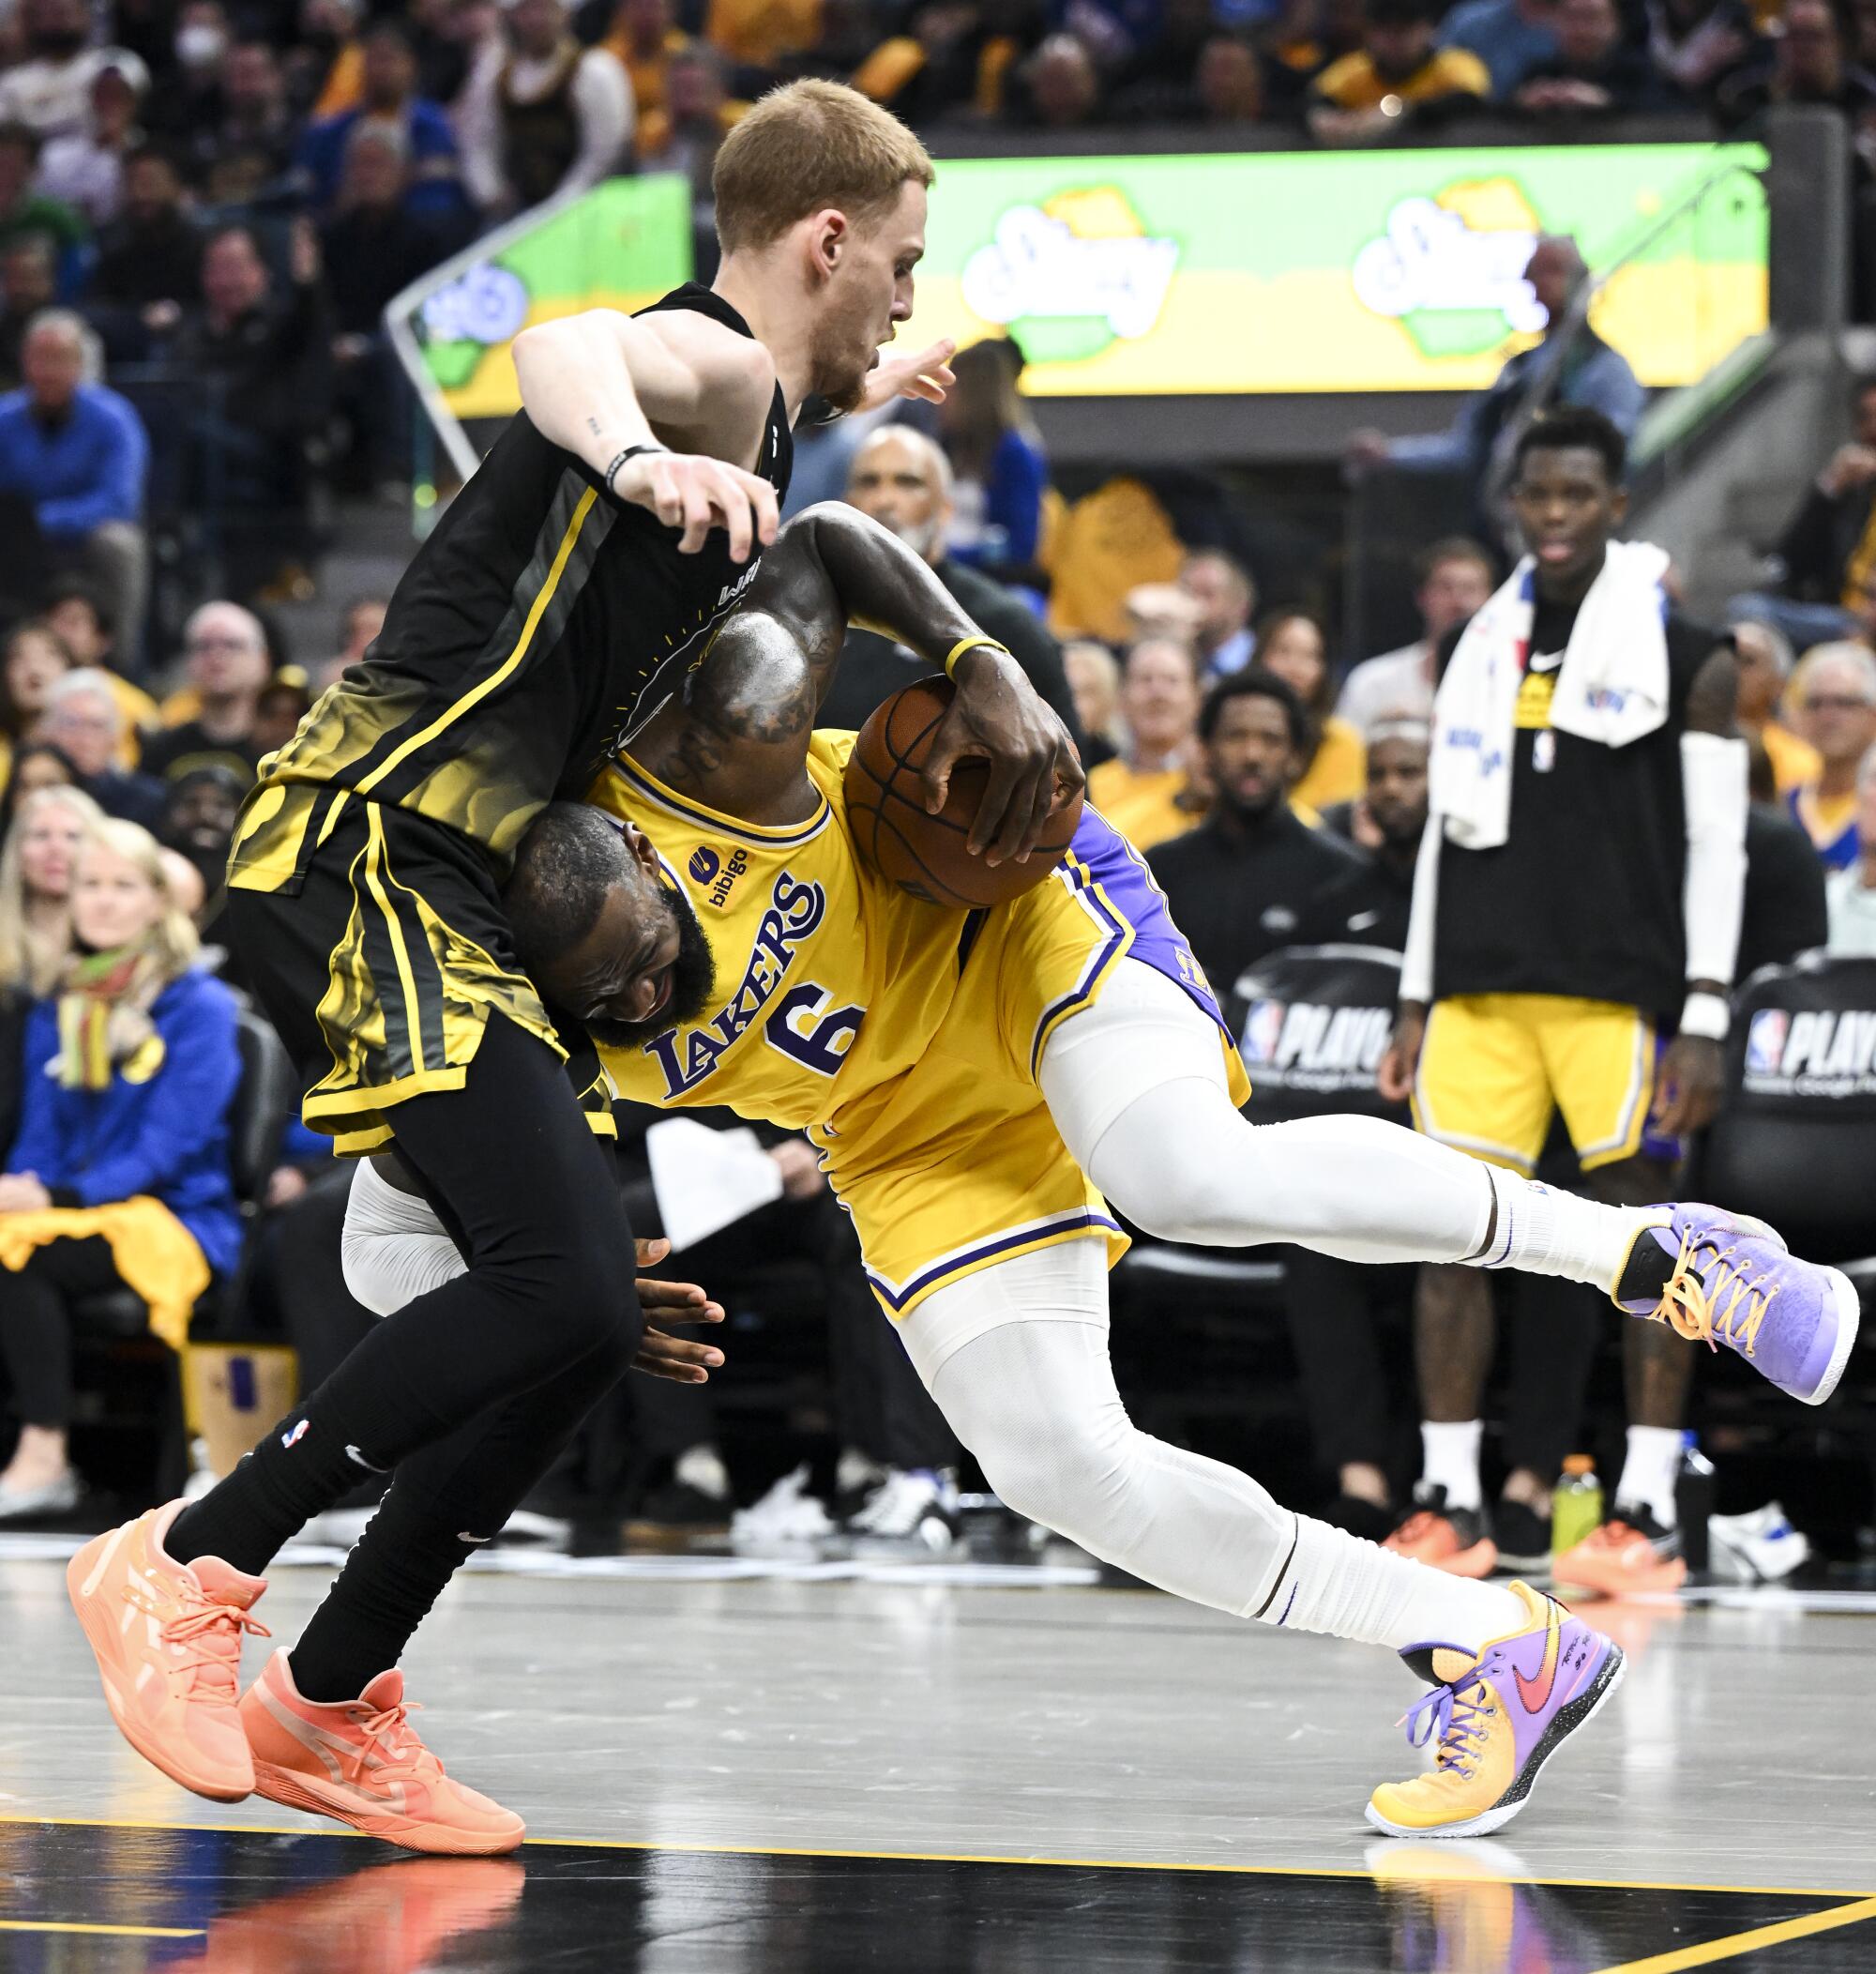 Lakers forward LeBron James, right, moves the ball against Warriors guard Donte DiVincenzo during the second quarter.